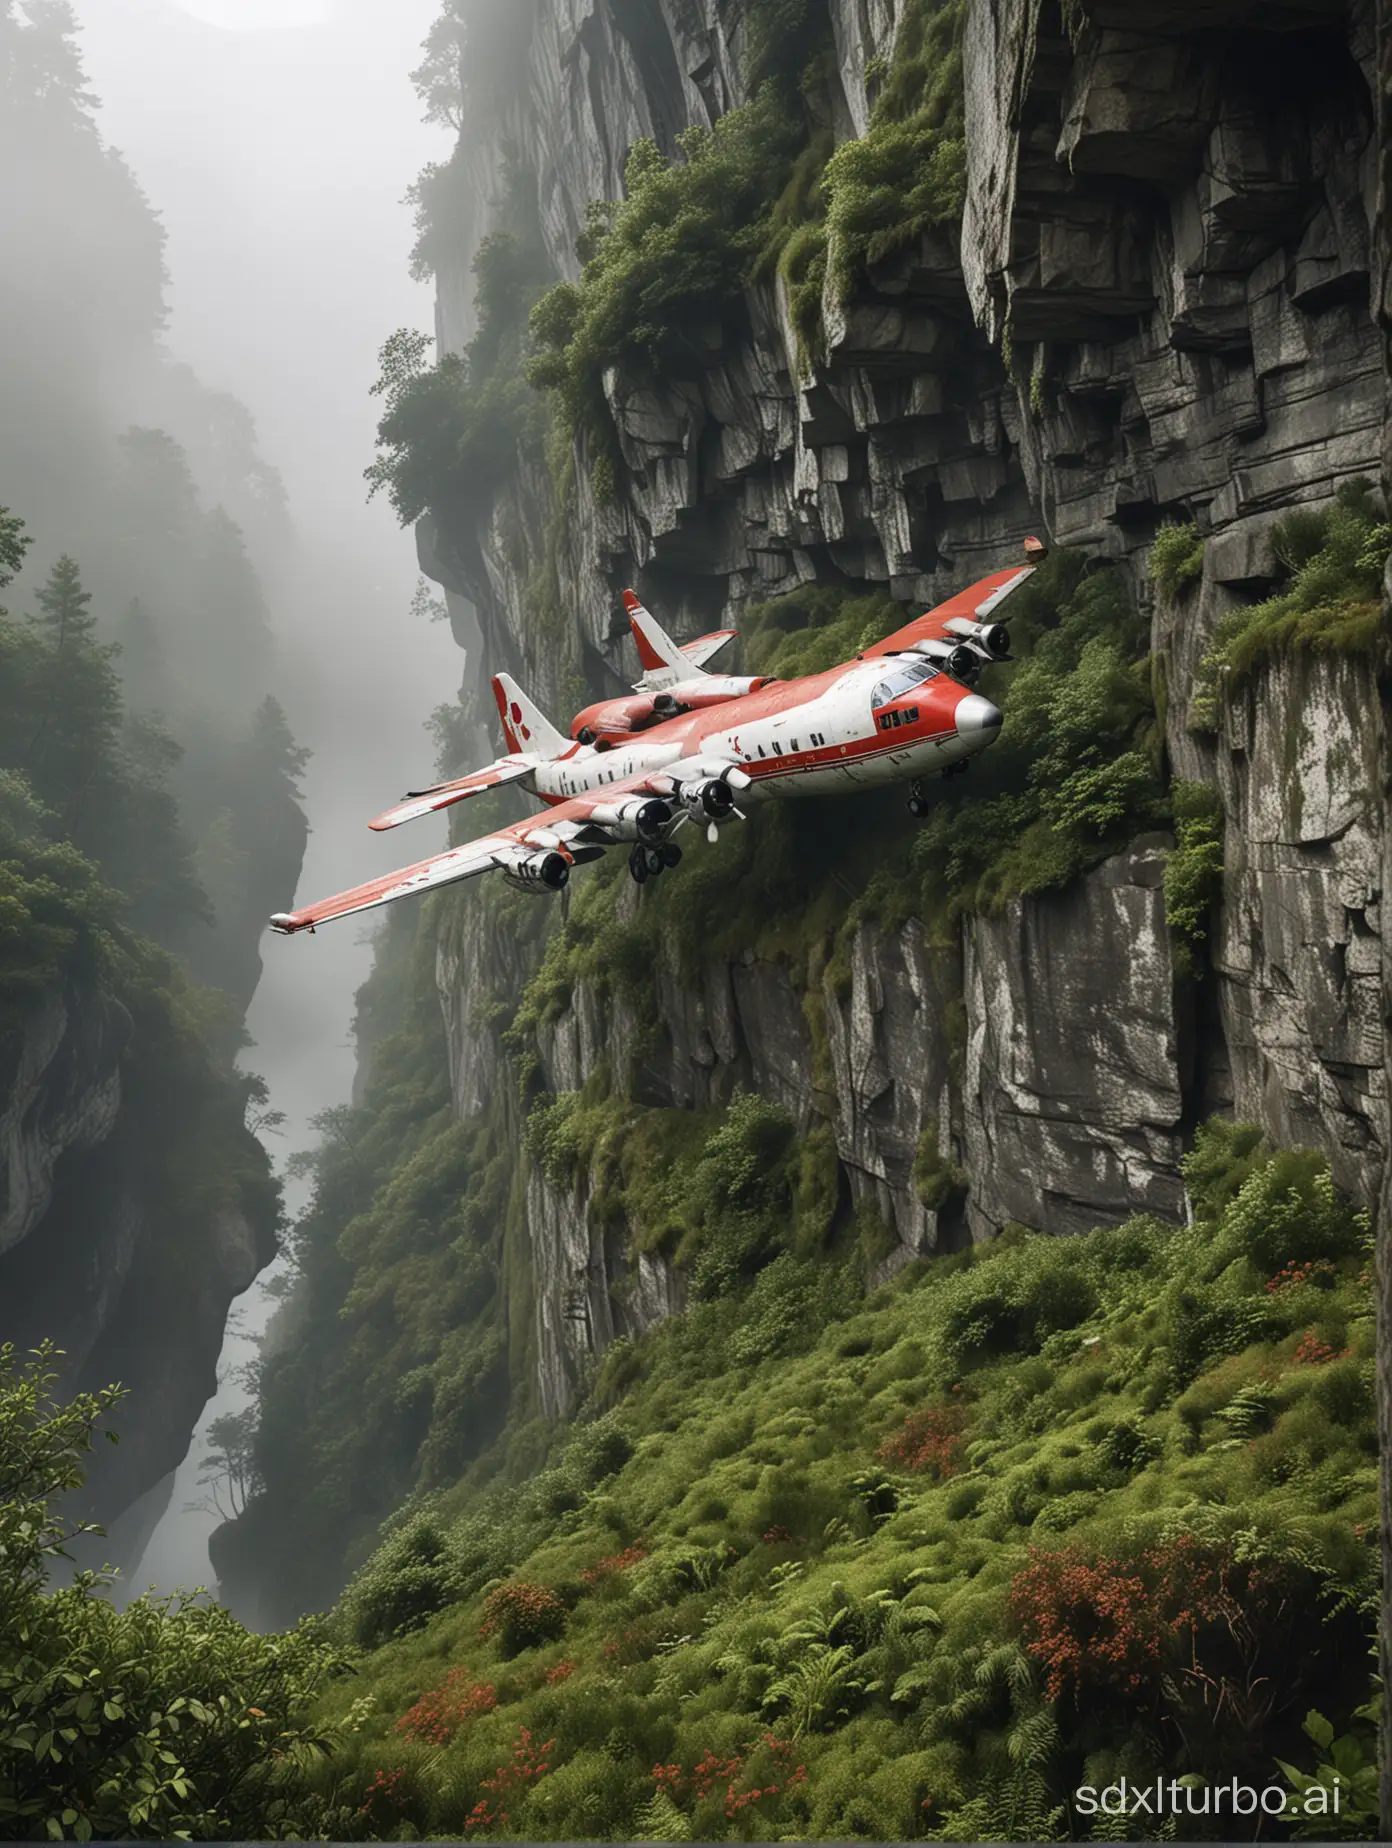 Create an old, ultra realistic airplane that appears to have been abandoned for a significant period. Its red and white colors are faded, and it's covered in moss and greenery, suggesting it has not moved from its spot for a long time. : The airplane is situated precariously on the edge of a steep cliff. The cliff itself is rocky and has sparse vegetation.  Below the cliff, there's a valley filled with mist and dense forest, contributing to the eerie and mysterious atmosphere of the scene.the Atmosphere: The mist, combined with the unusual placement of the airplane, evokes a sense of danger and desolation. There are no signs of people or any clues about how the bus ended up in such a precarious position.